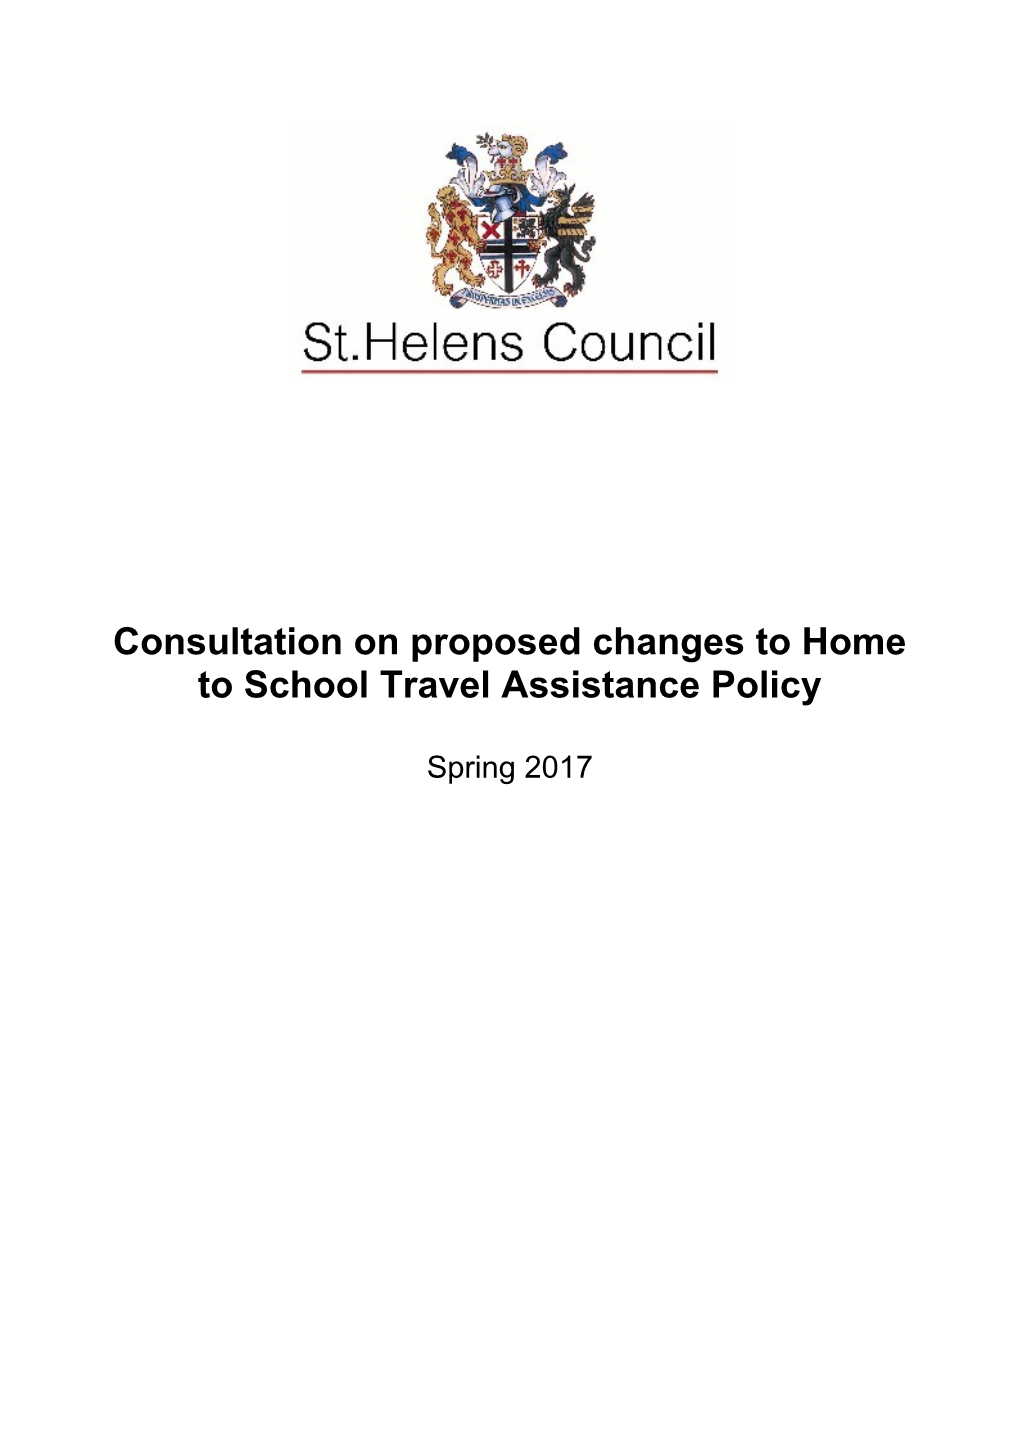 Consultation on Proposed Changes to Home to School Travel Assistance Policy